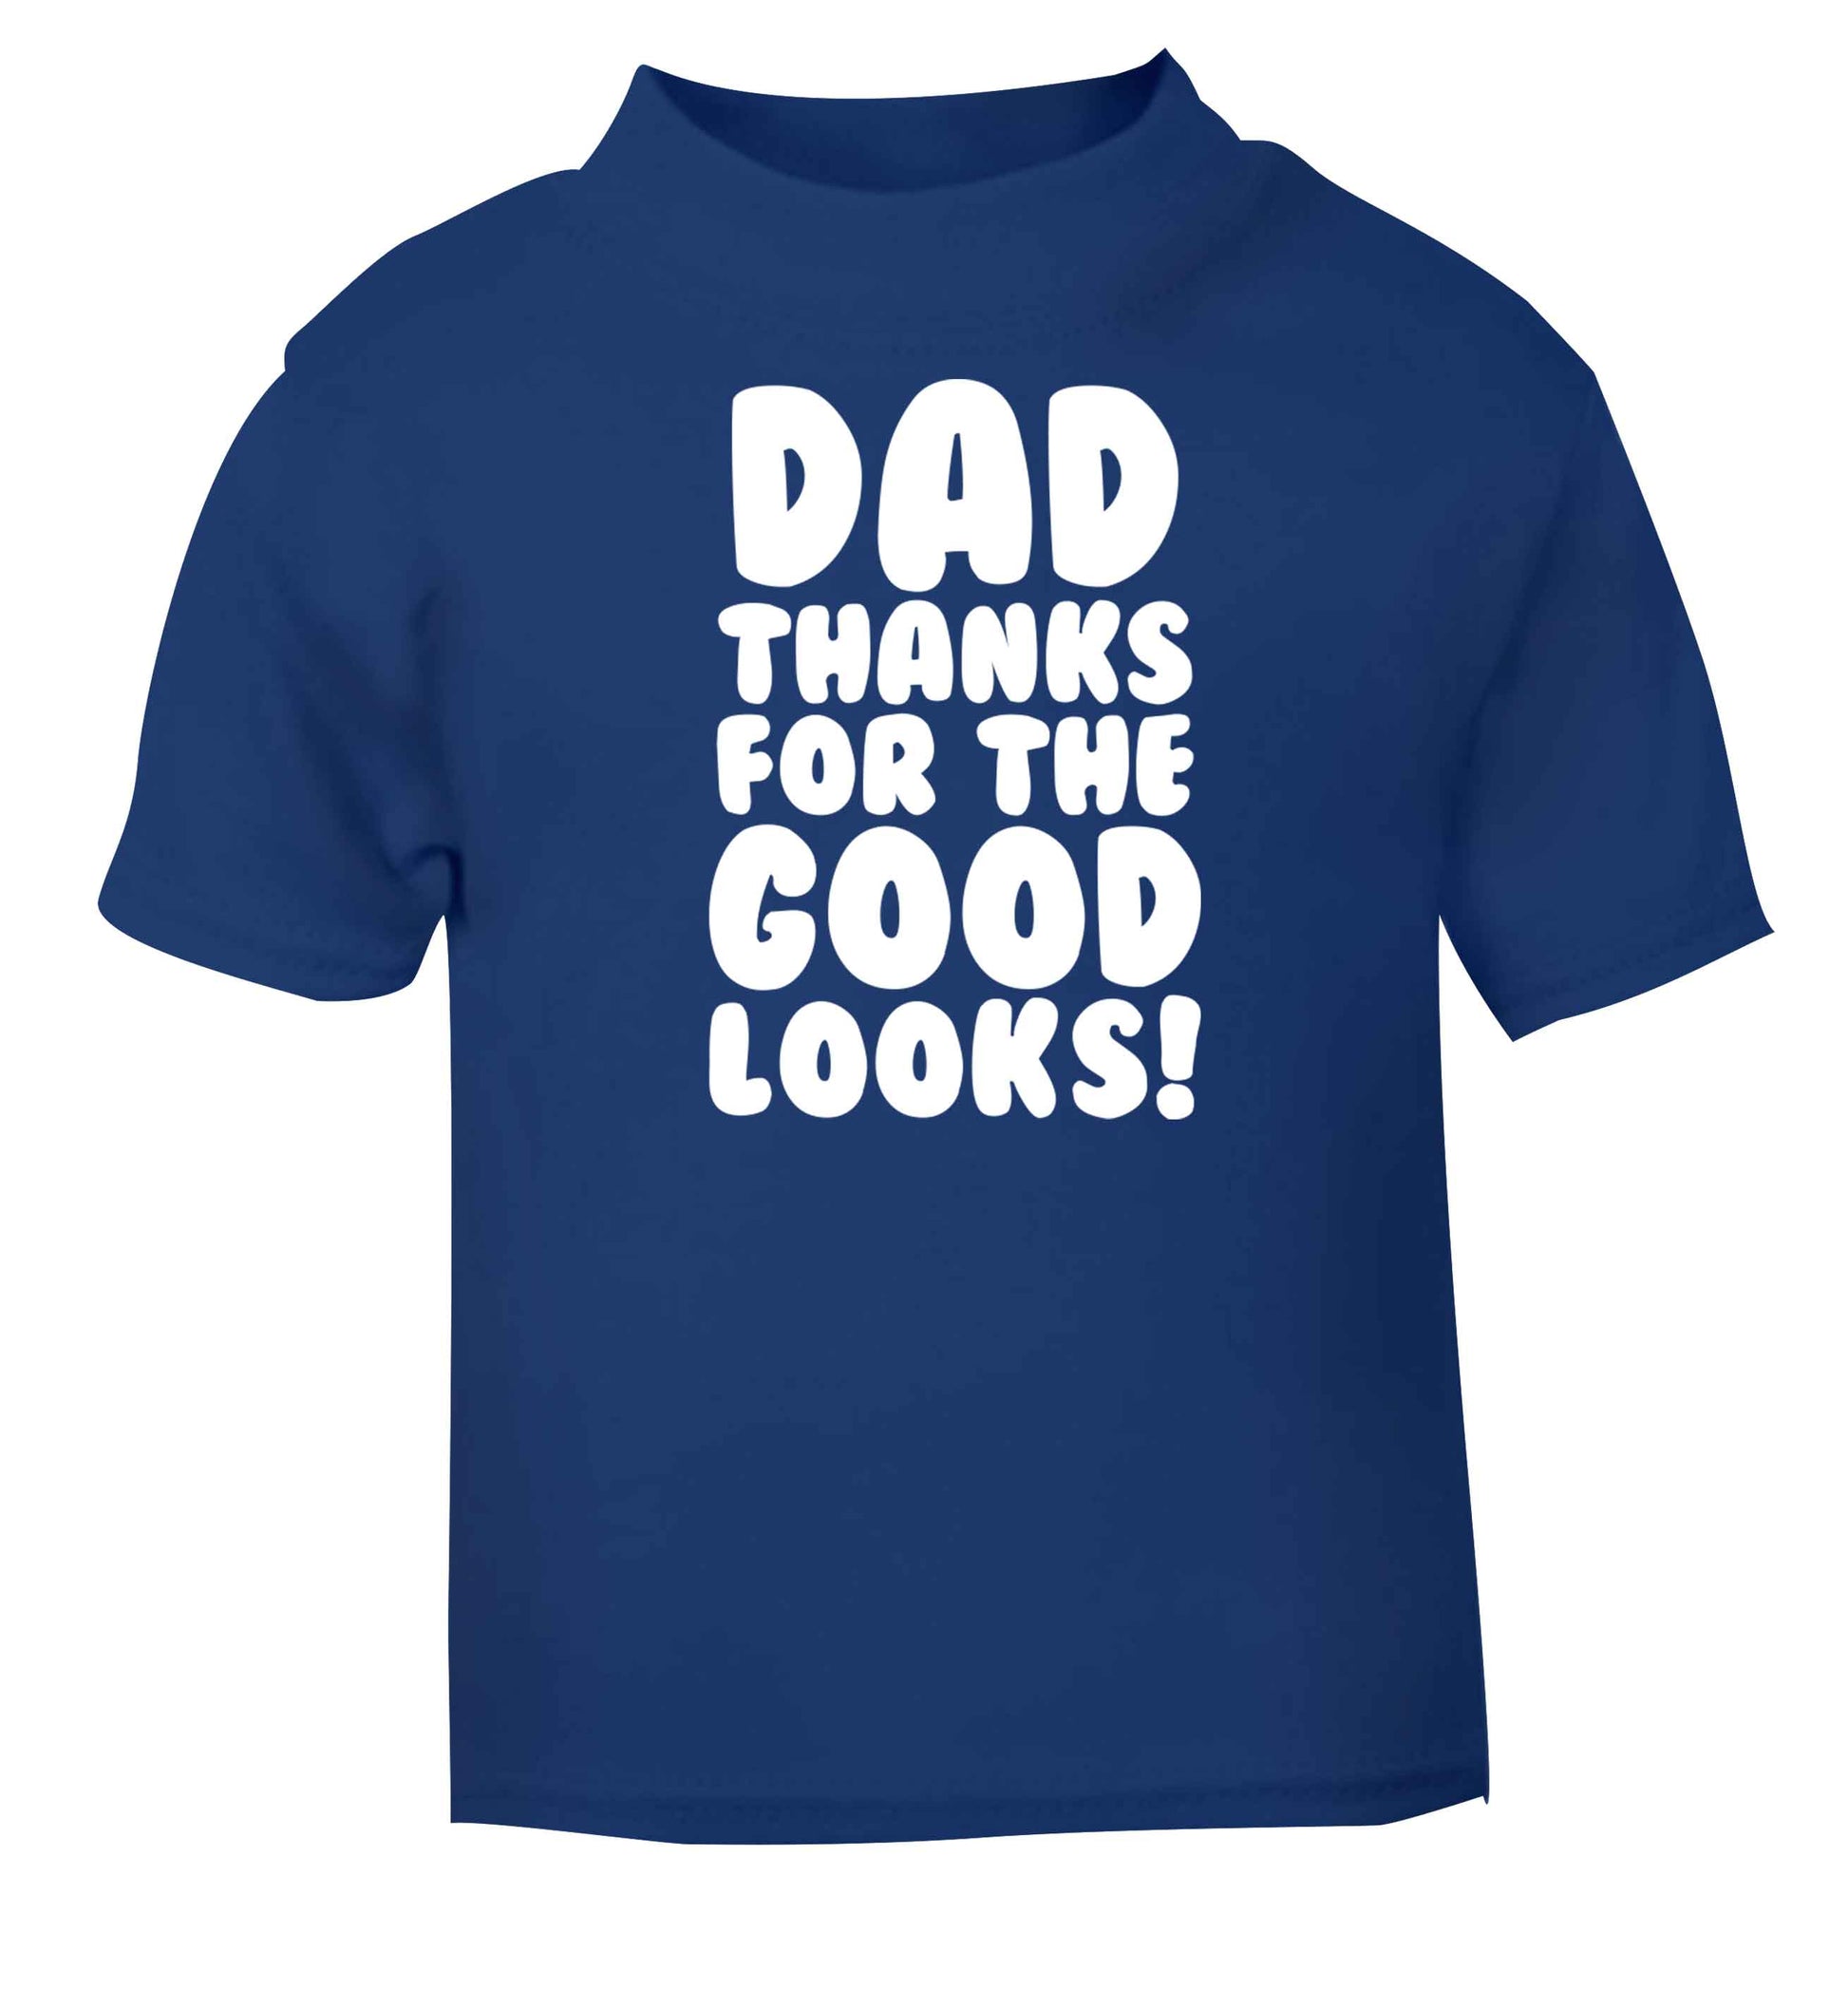 Dad thanks for the good looks blue baby toddler Tshirt 2 Years